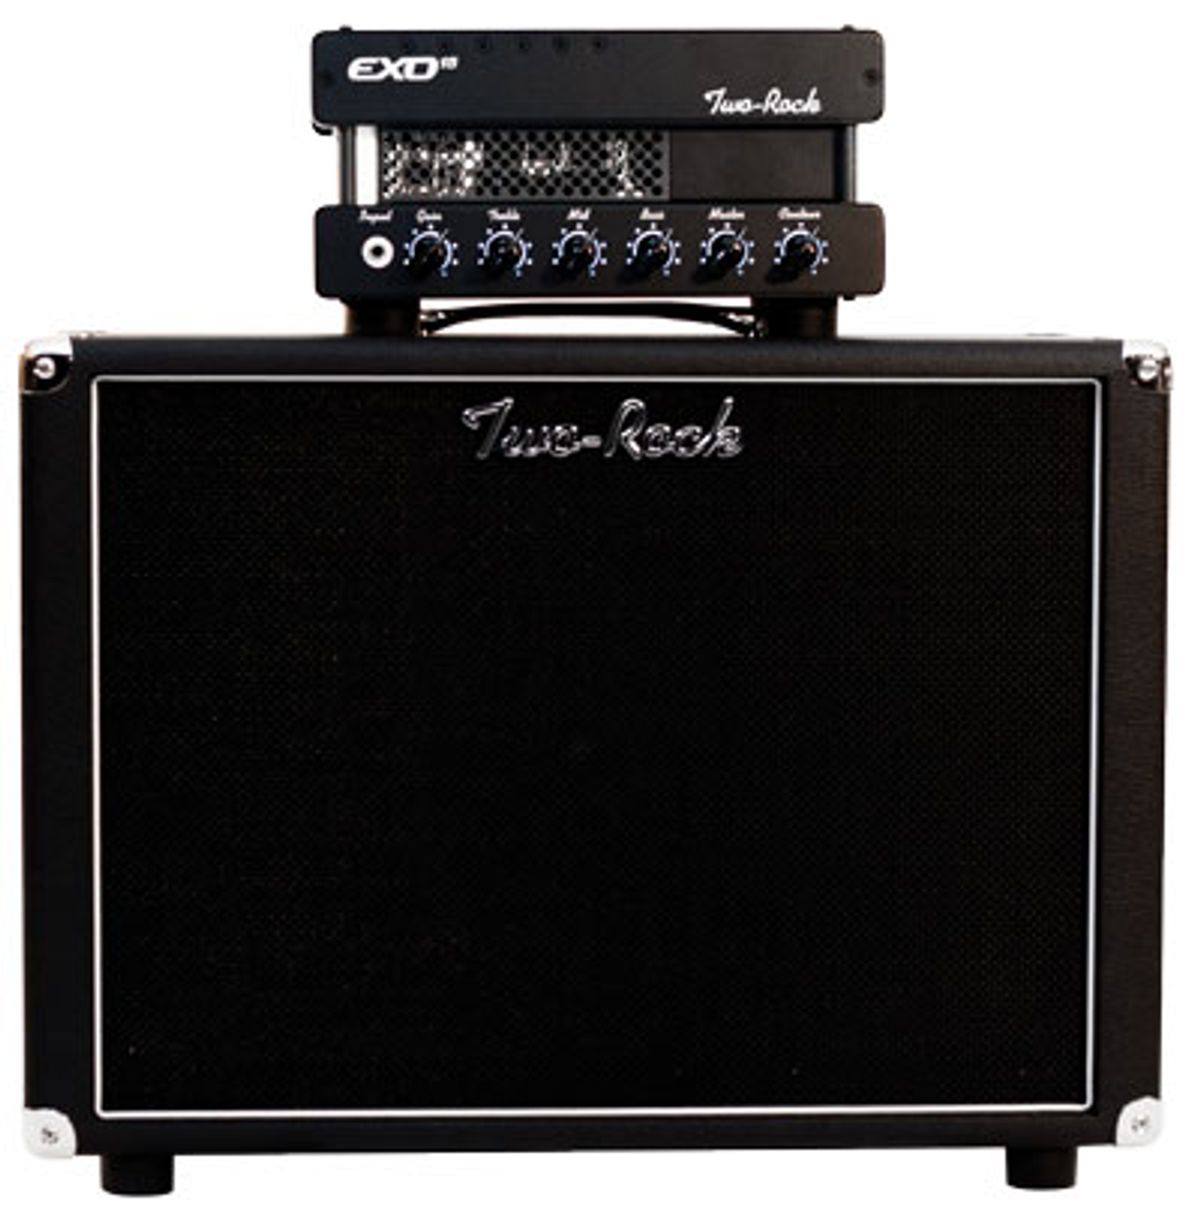 Two-Rock Exo-15 Amp Review